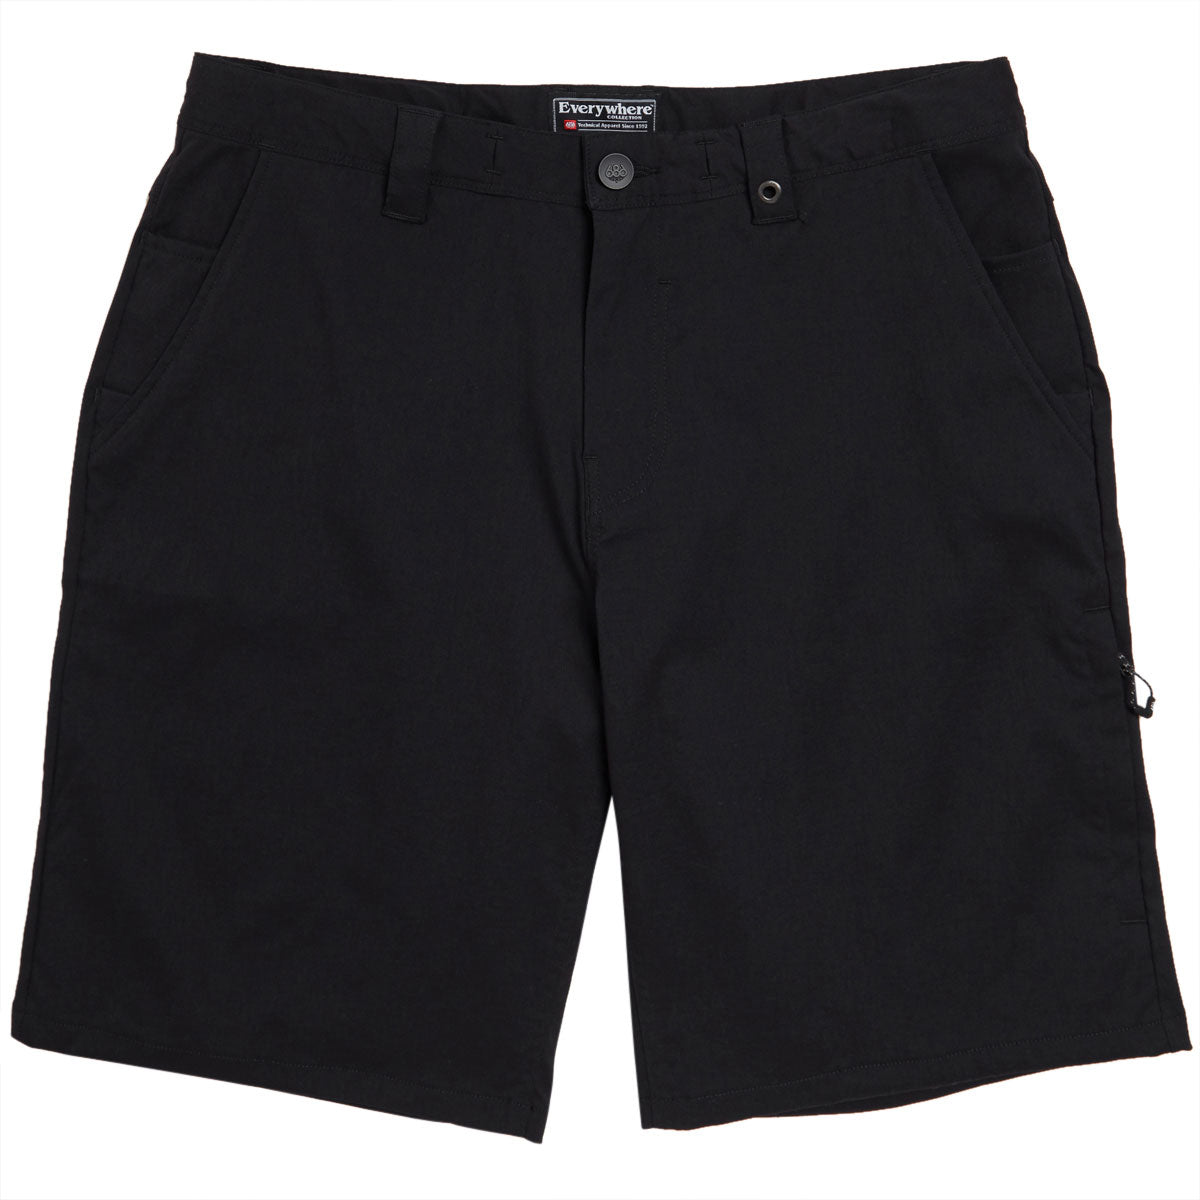 686 Everywhere Hybrid Relaxed Fit Shorts - Black image 1